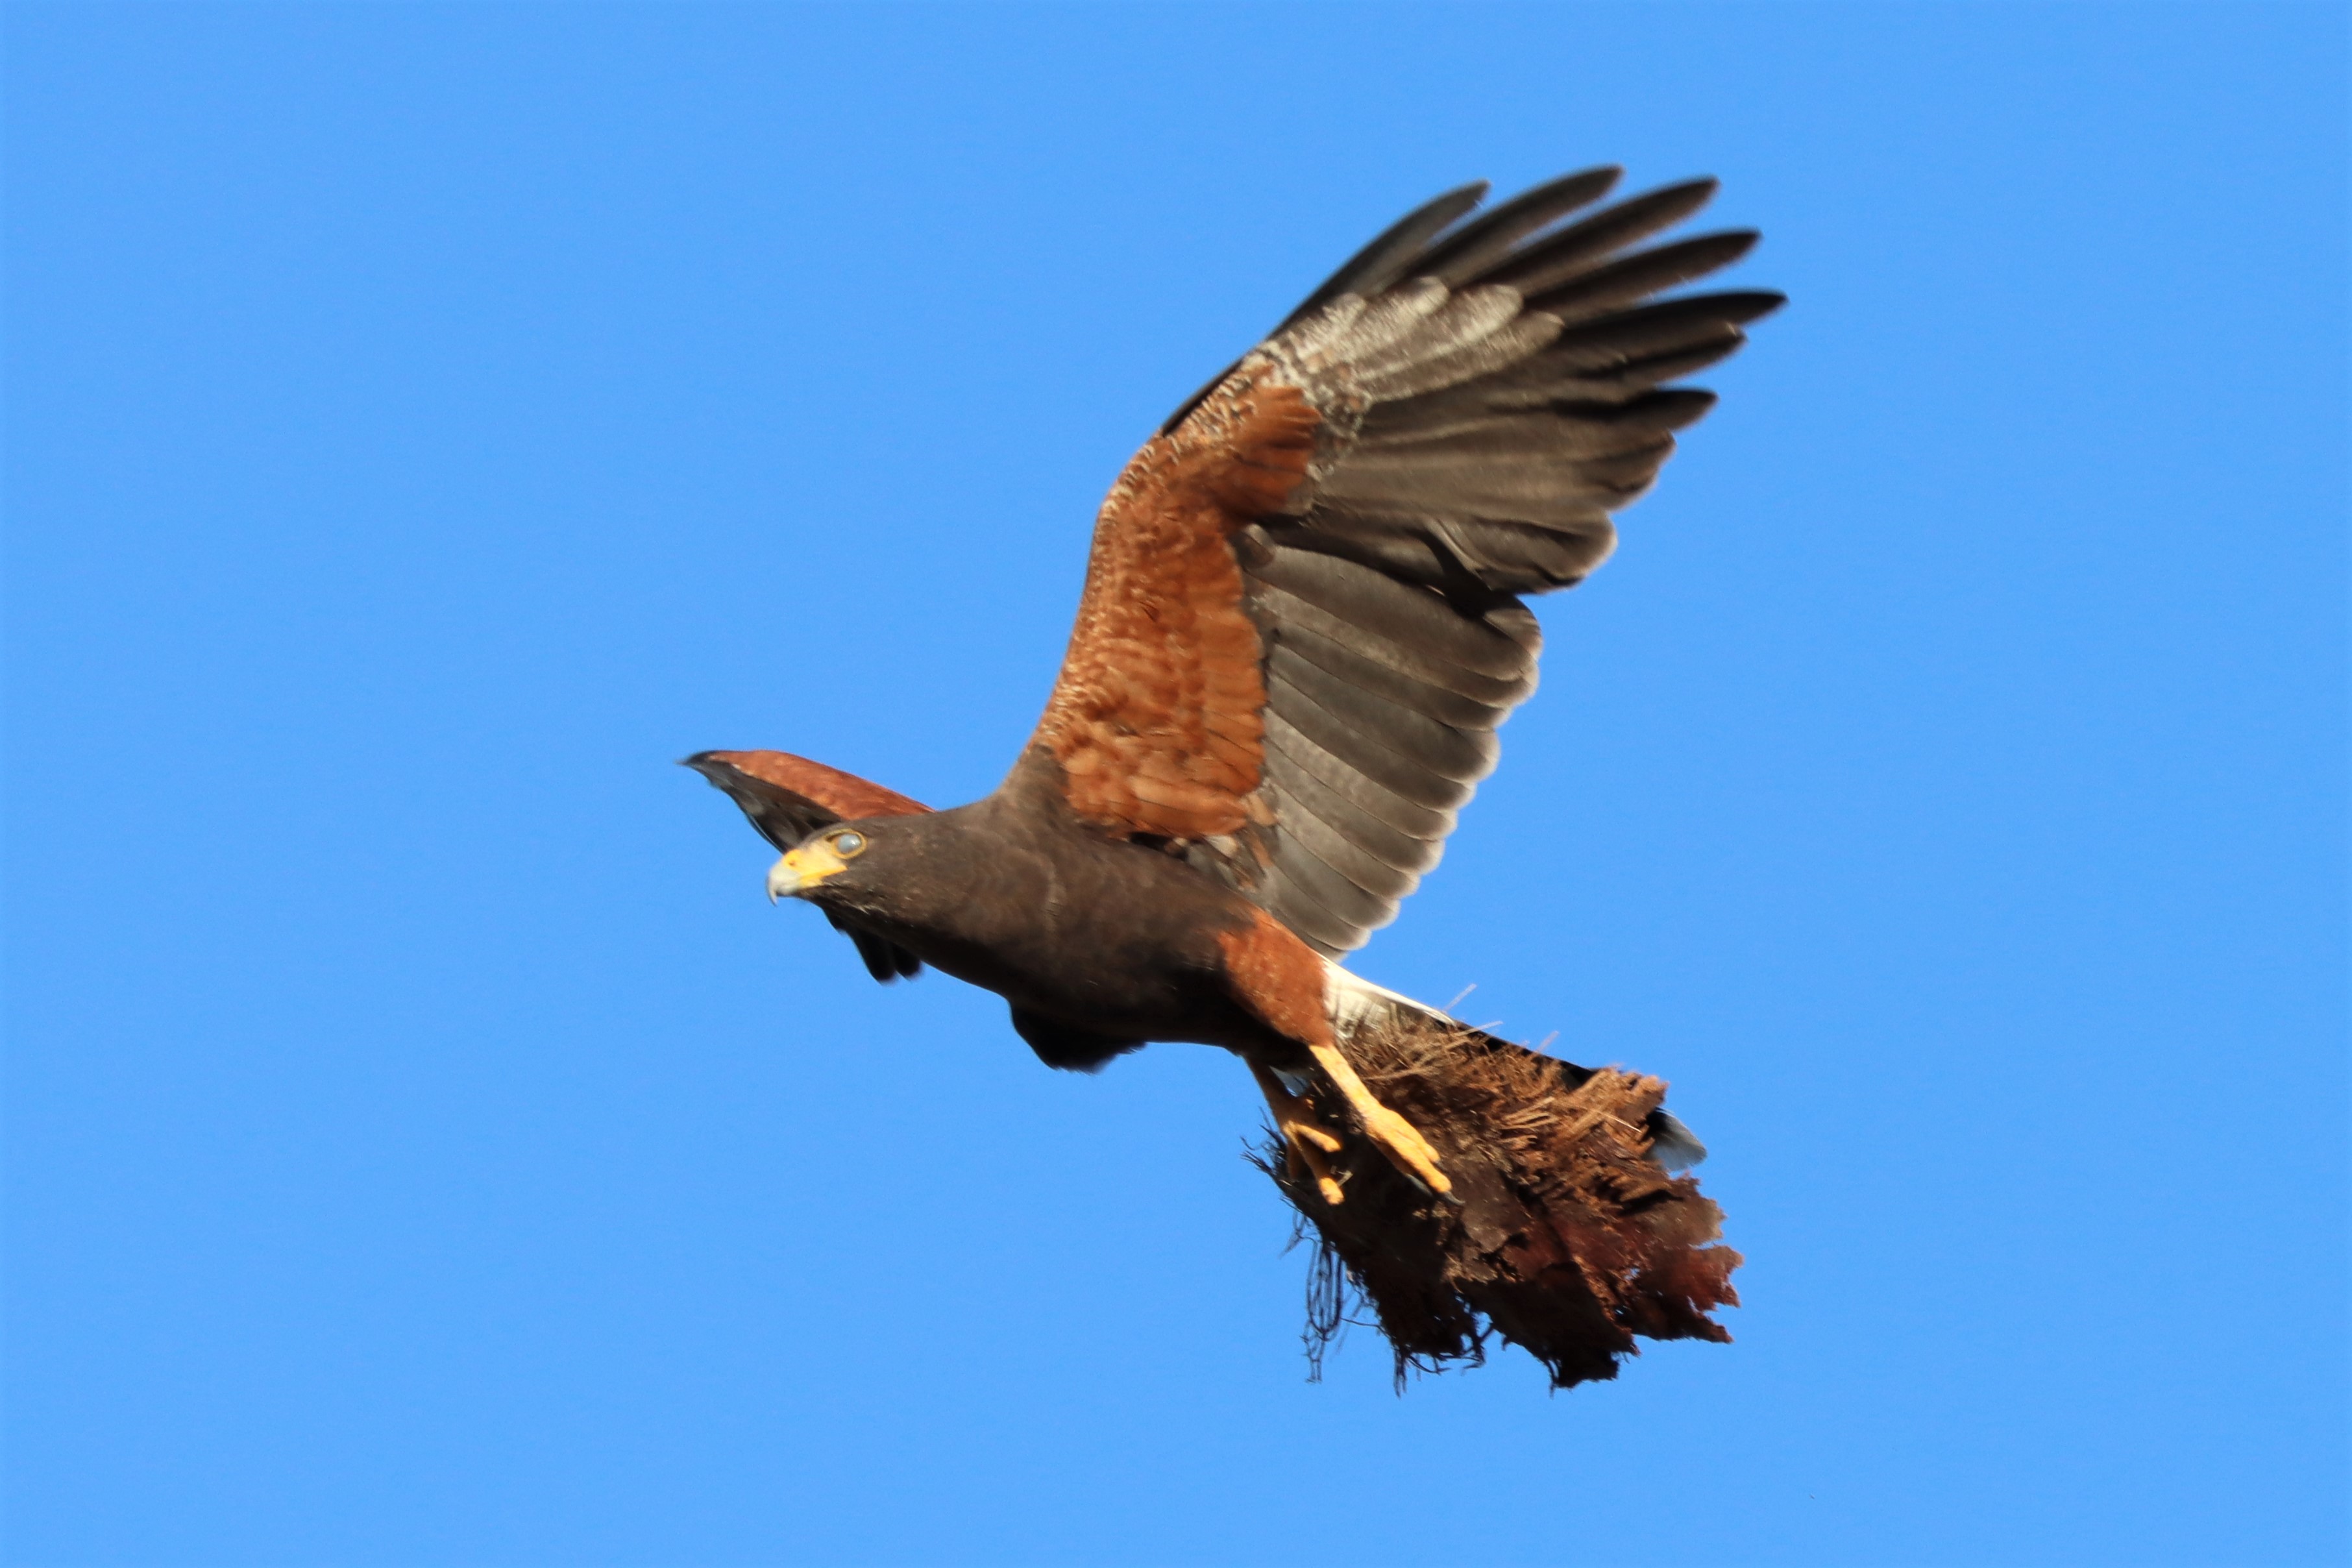 Photo by Buddy Walker  |  Harris's Hawk flying with nesting for nest